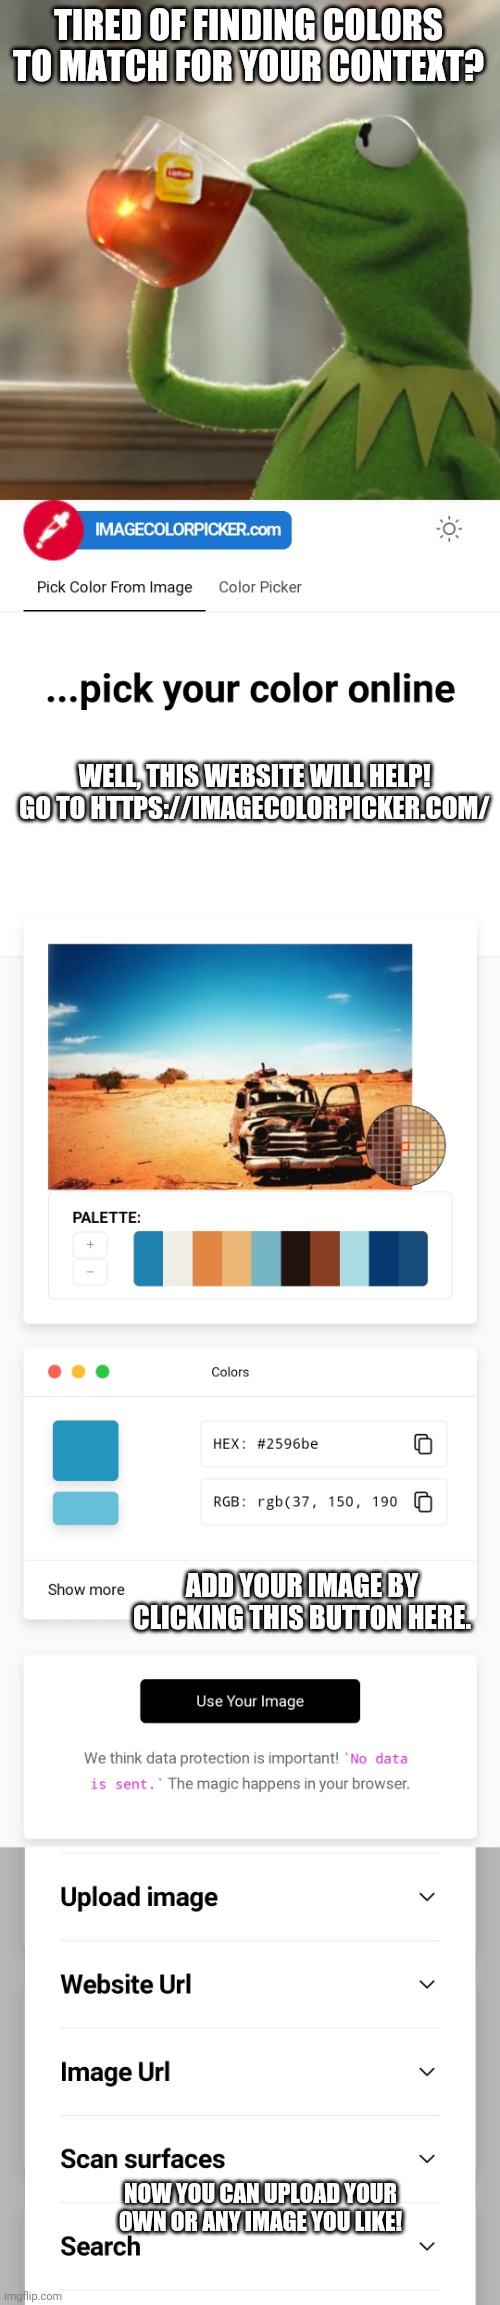 Hello! | TIRED OF FINDING COLORS TO MATCH FOR YOUR CONTEXT? WELL, THIS WEBSITE WILL HELP! GO TO HTTPS://IMAGECOLORPICKER.COM/; ADD YOUR IMAGE BY CLICKING THIS BUTTON HERE. NOW YOU CAN UPLOAD YOUR OWN OR ANY IMAGE YOU LIKE! | image tagged in memes,but that's none of my business,new website,colors,code,hex | made w/ Imgflip meme maker